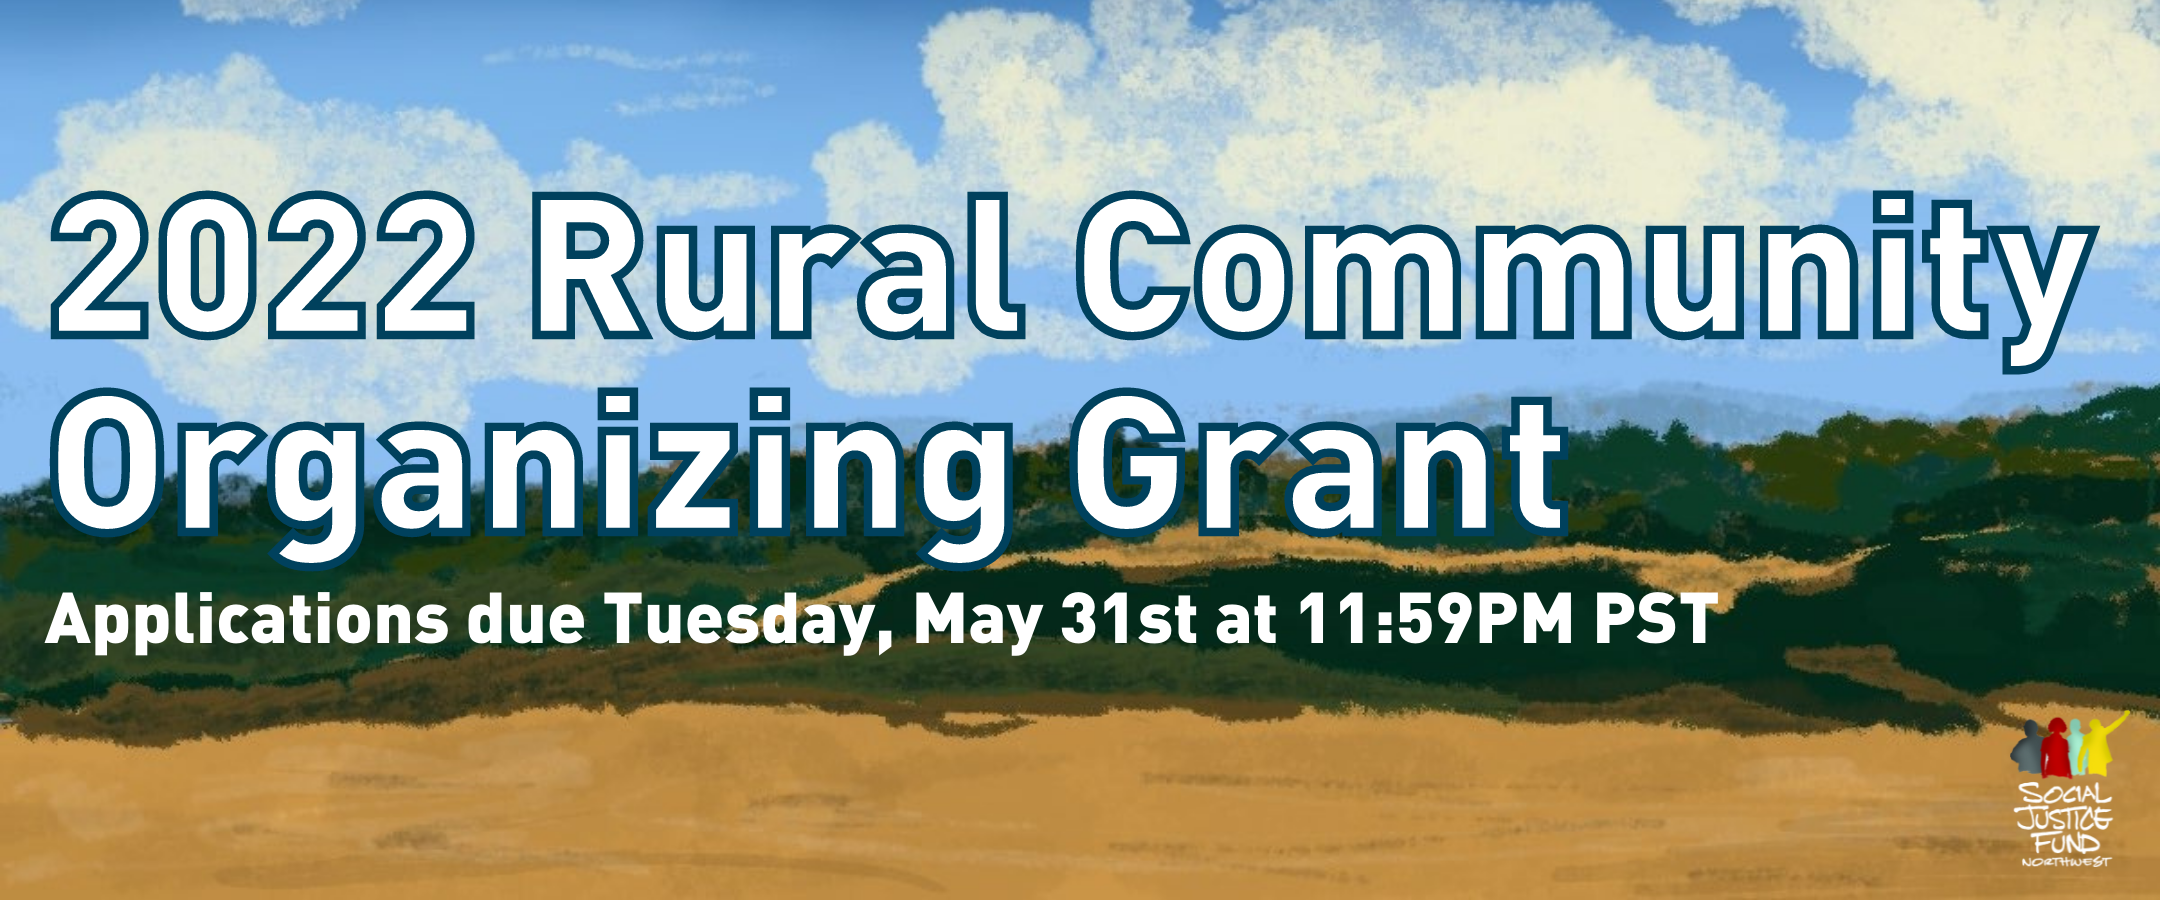 Banner illustration of a rural idaho landscape with a blue sky. Text reads 2022 Rural Community Organizing Grant. Applications due Tuesday May 31st by 11.59PM PST.